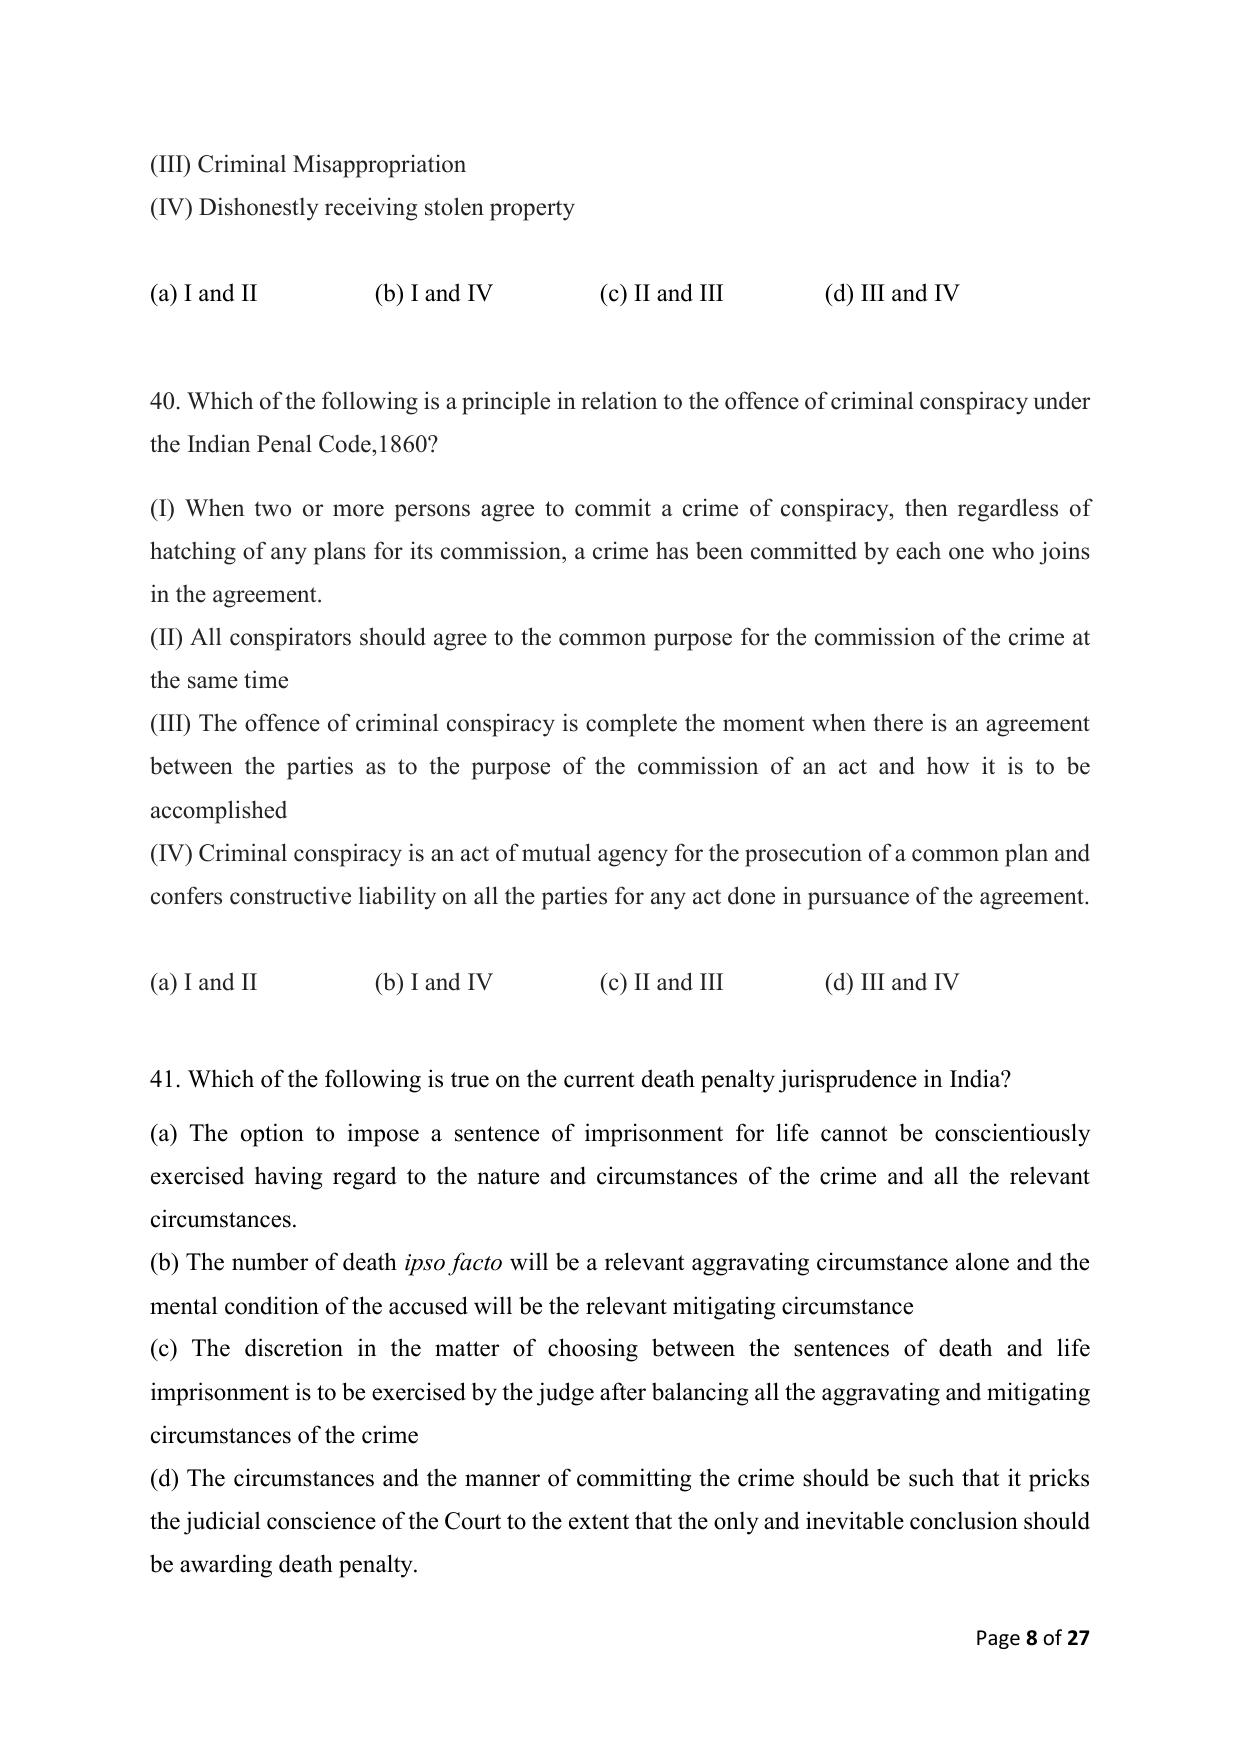 AILET 2020 Question Paper for LLM - Page 8